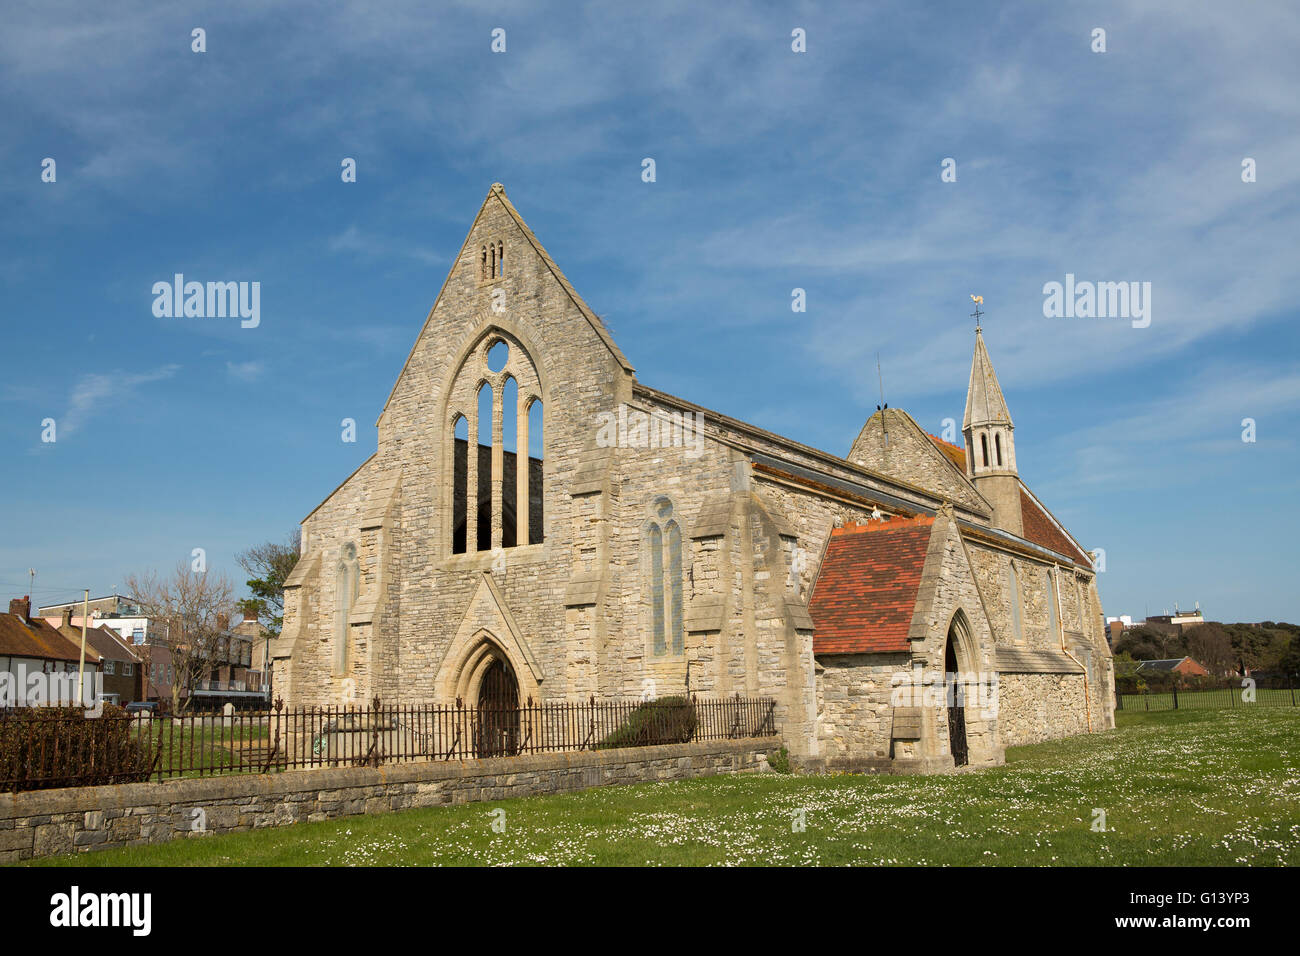 Garrison church in old Portsmouth. Damaged in WWII it still stands without a roof. Blue sky day with daisies in the grass field. Stock Photo